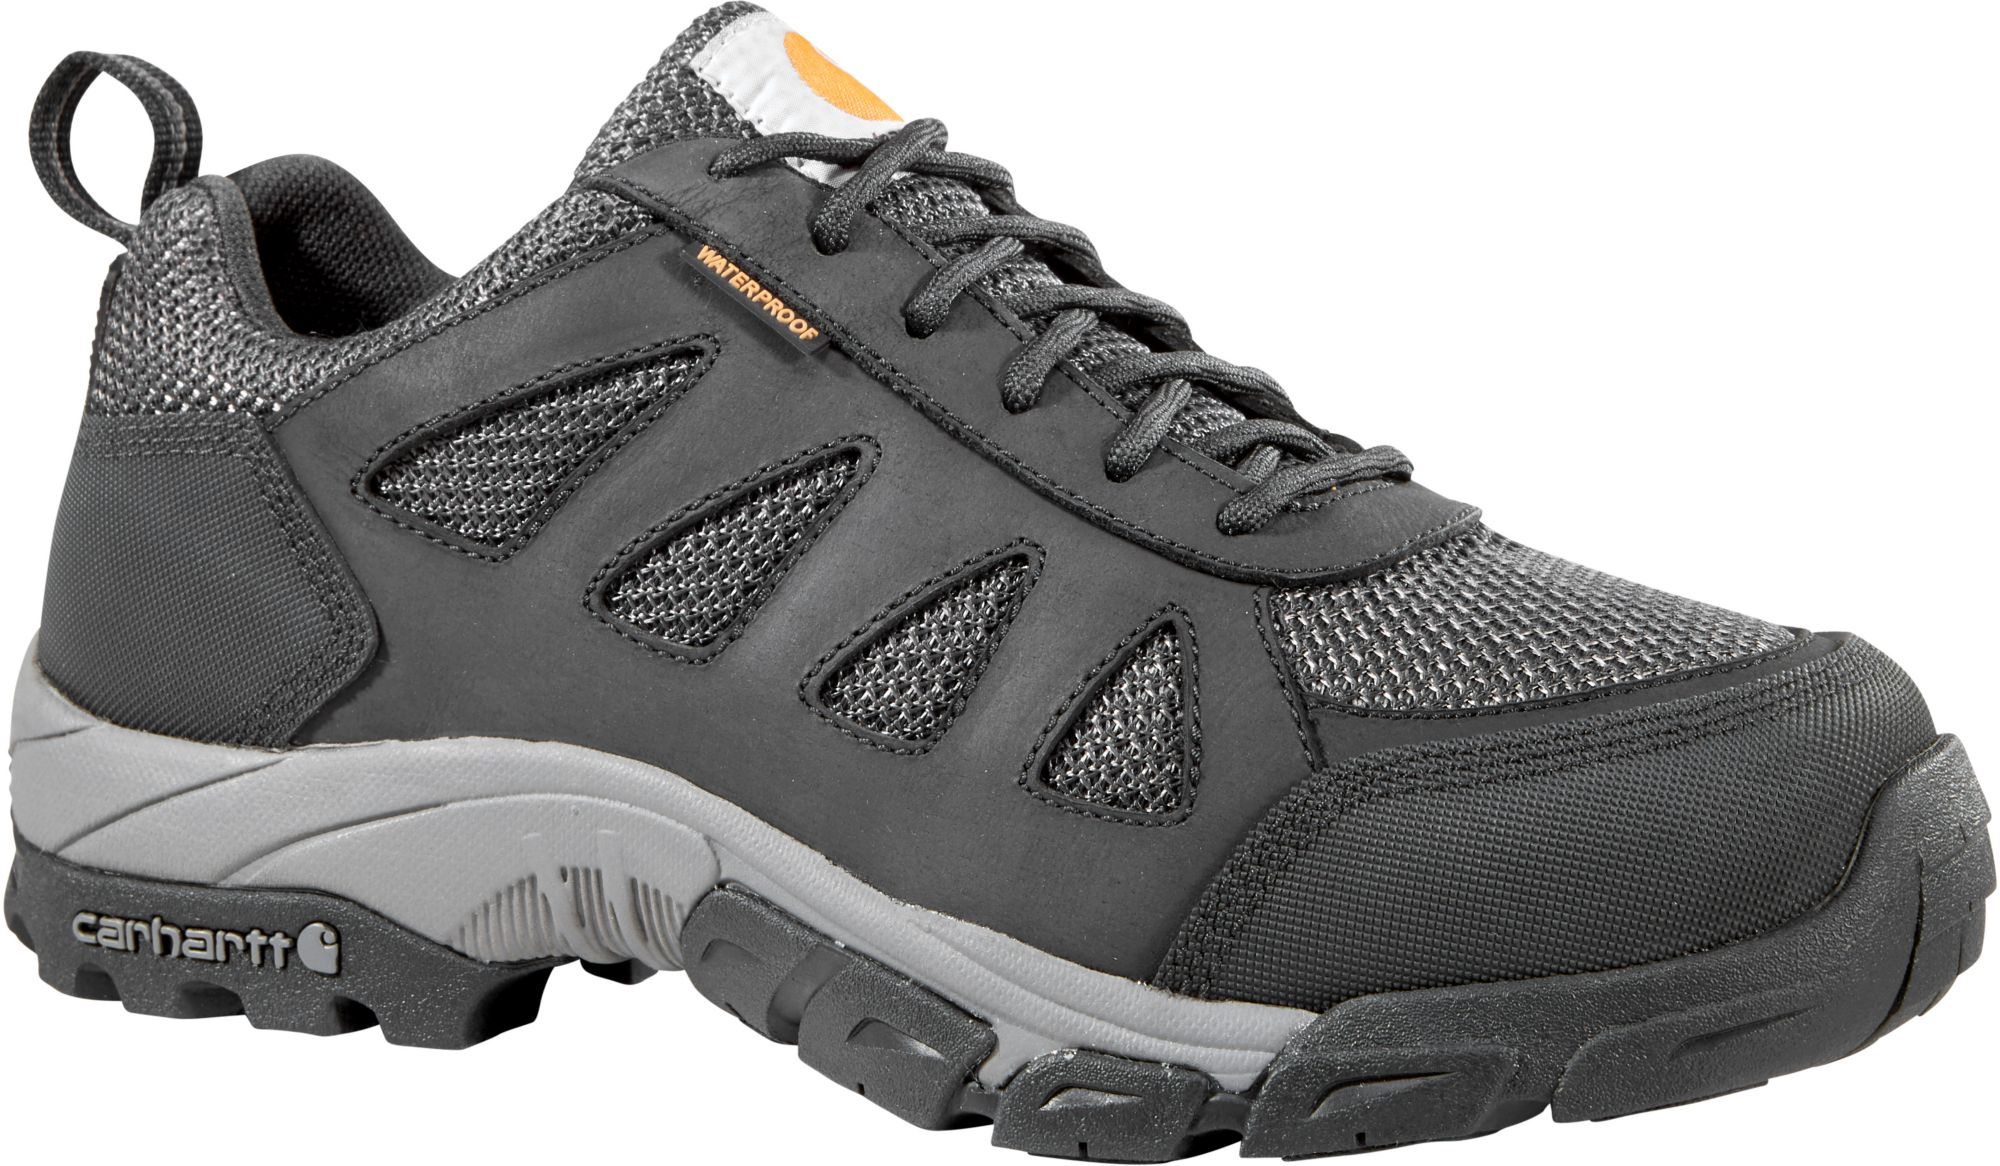 mens low top work shoes